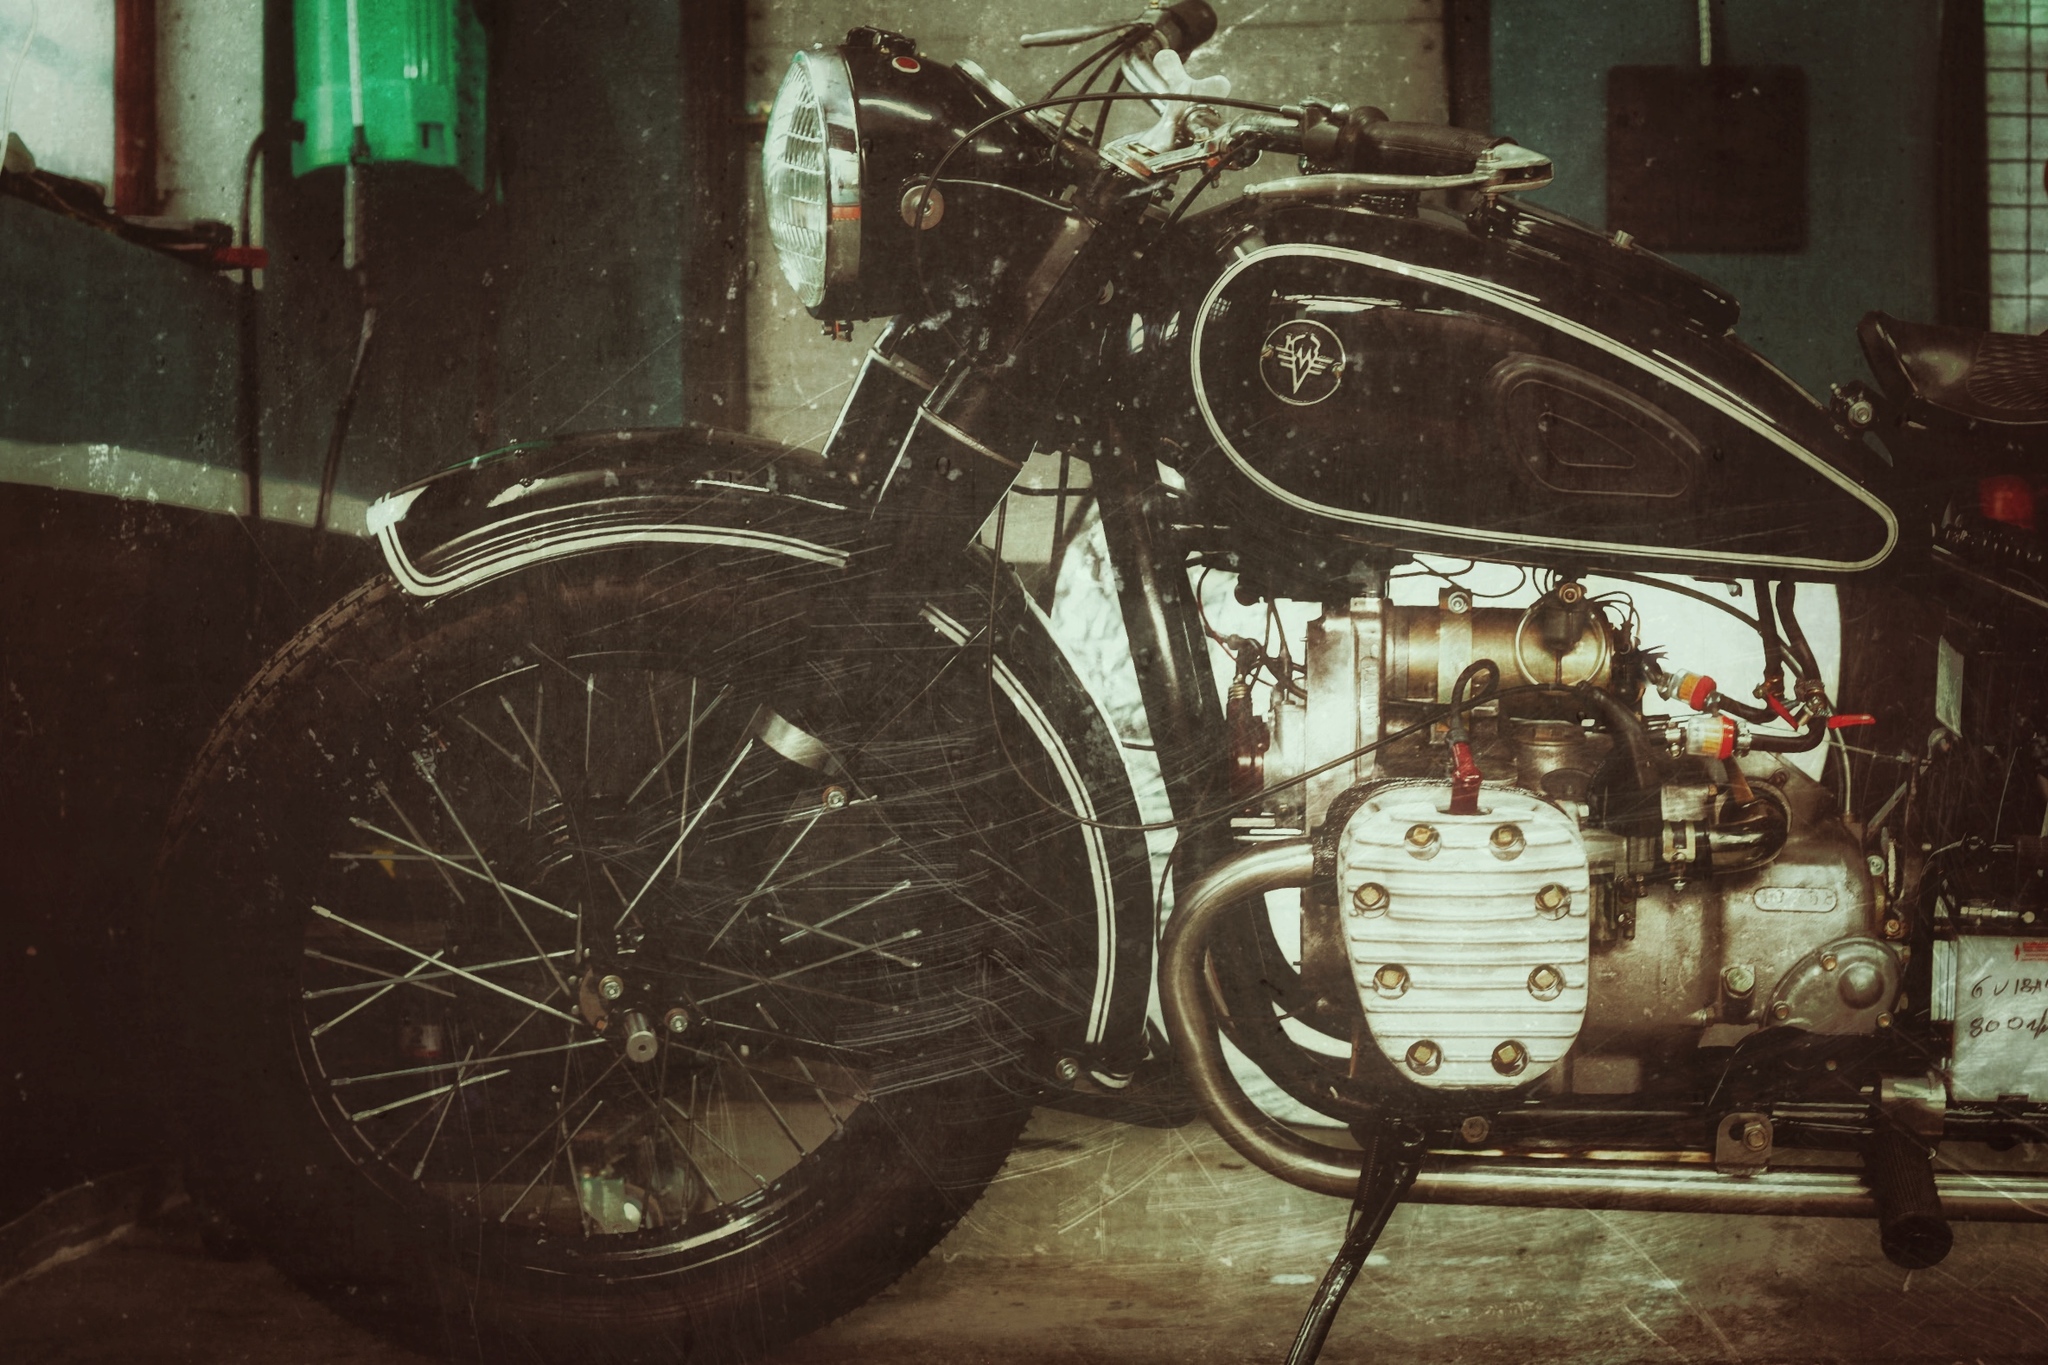 Motorcycle M 72 restoration - My, Retro, Made in USSR, Restoration, 50th, Past, Video, Longpost, Moto, Repair, Workshop, The photo, Story, Art, Mobile photography, Garage, Collection, Ural, Hobby, Transport, History of the USSR